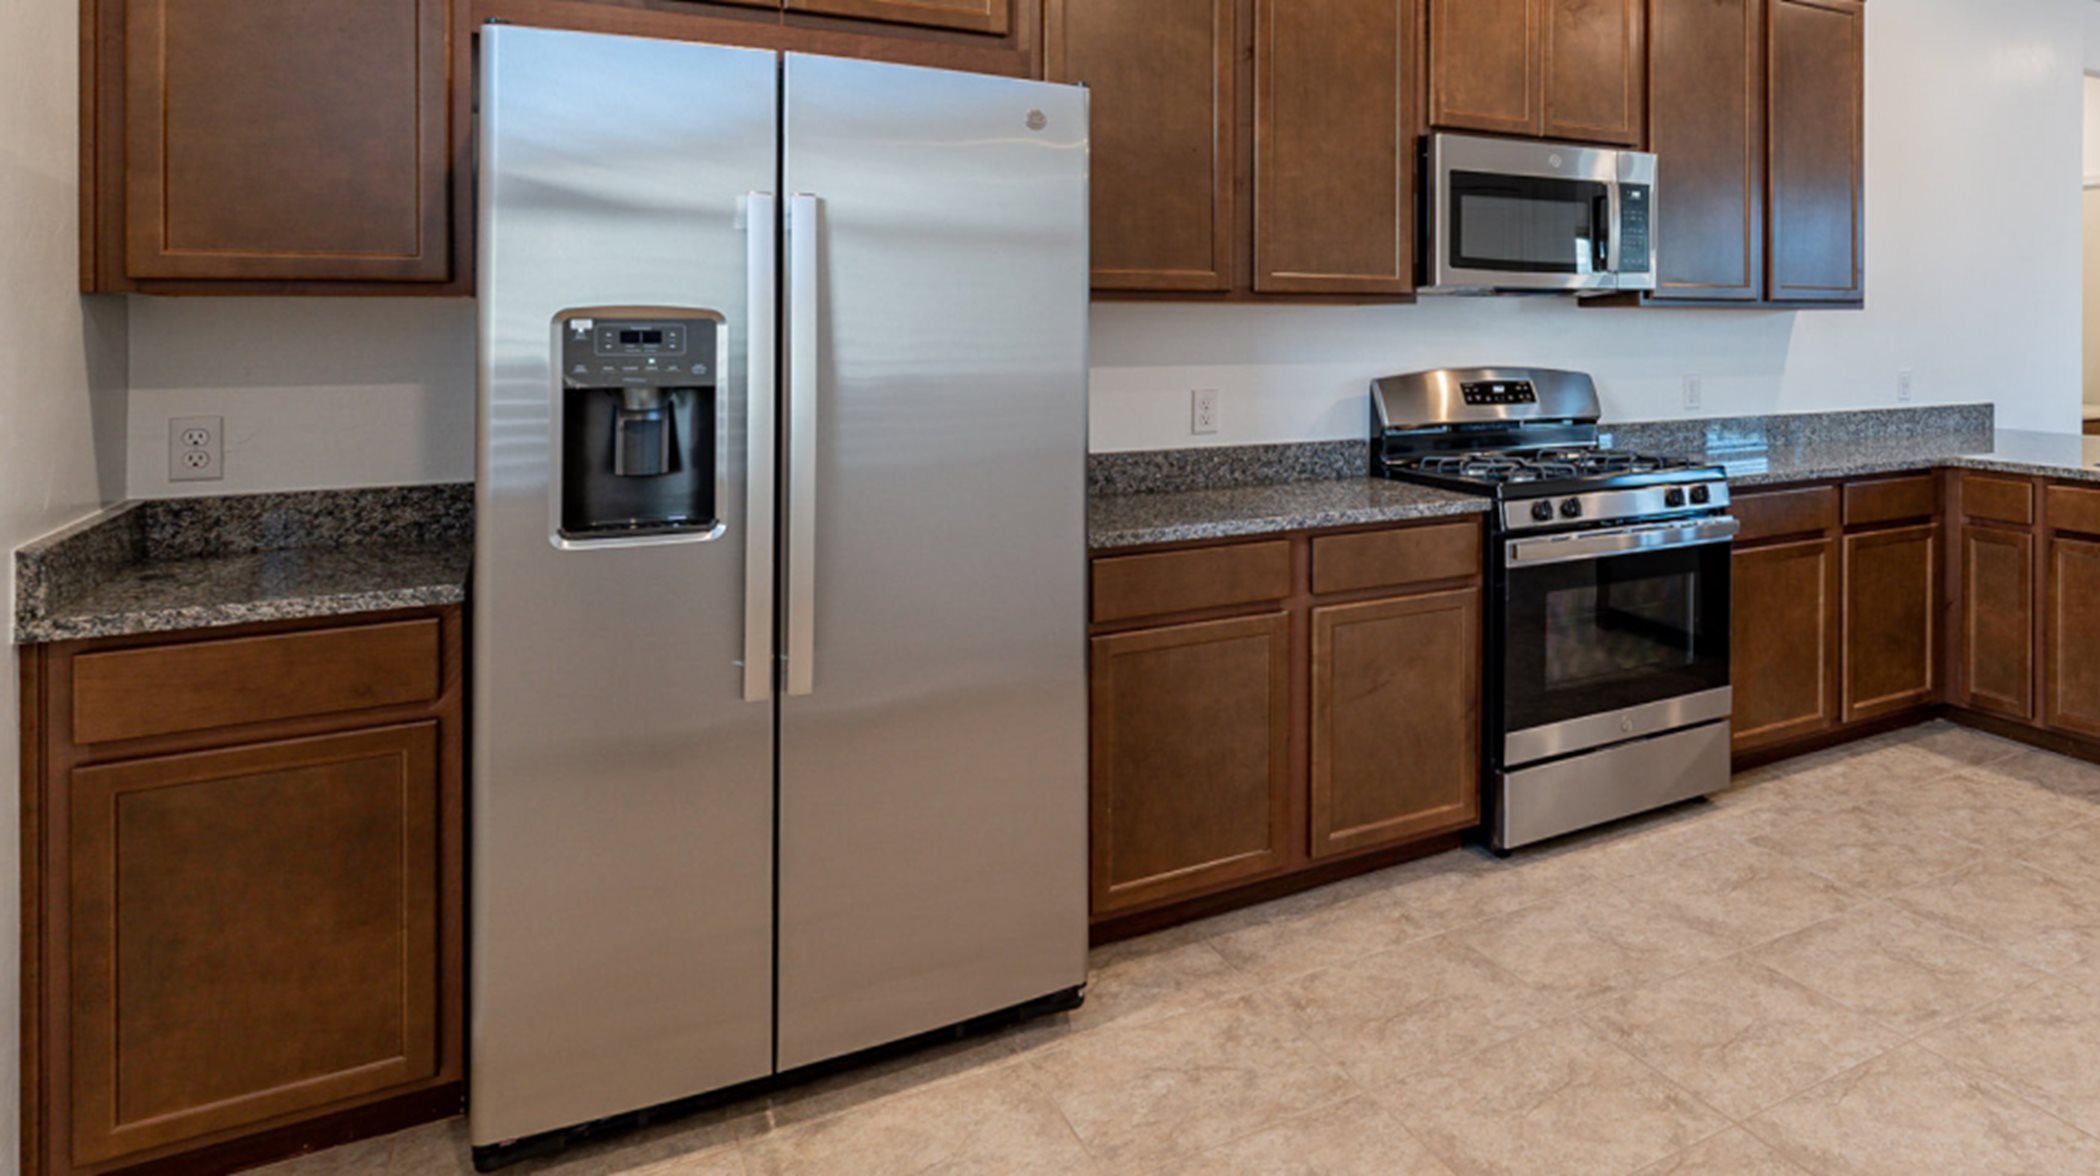 GE stainless steel side-by-side refrigerator